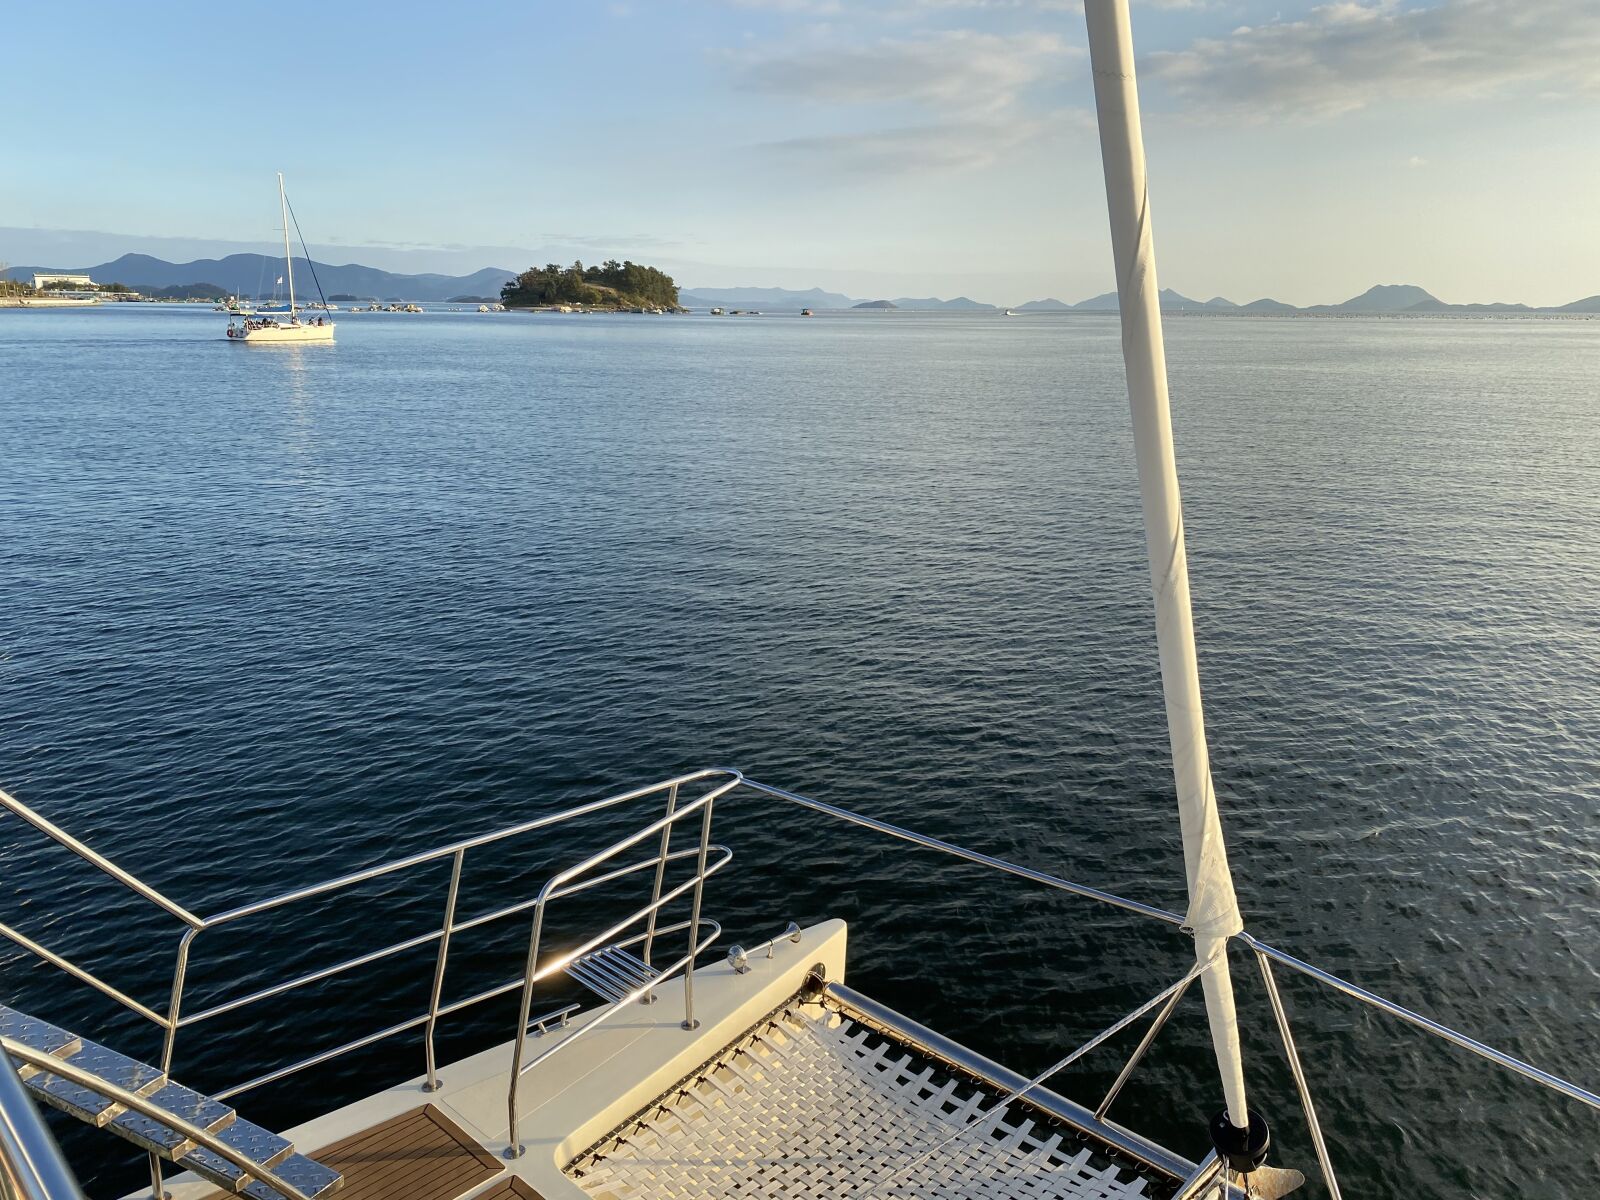 iPhone 11 back dual wide camera 4.25mm f/1.8 sample photo. Sea, boat, yacht photography